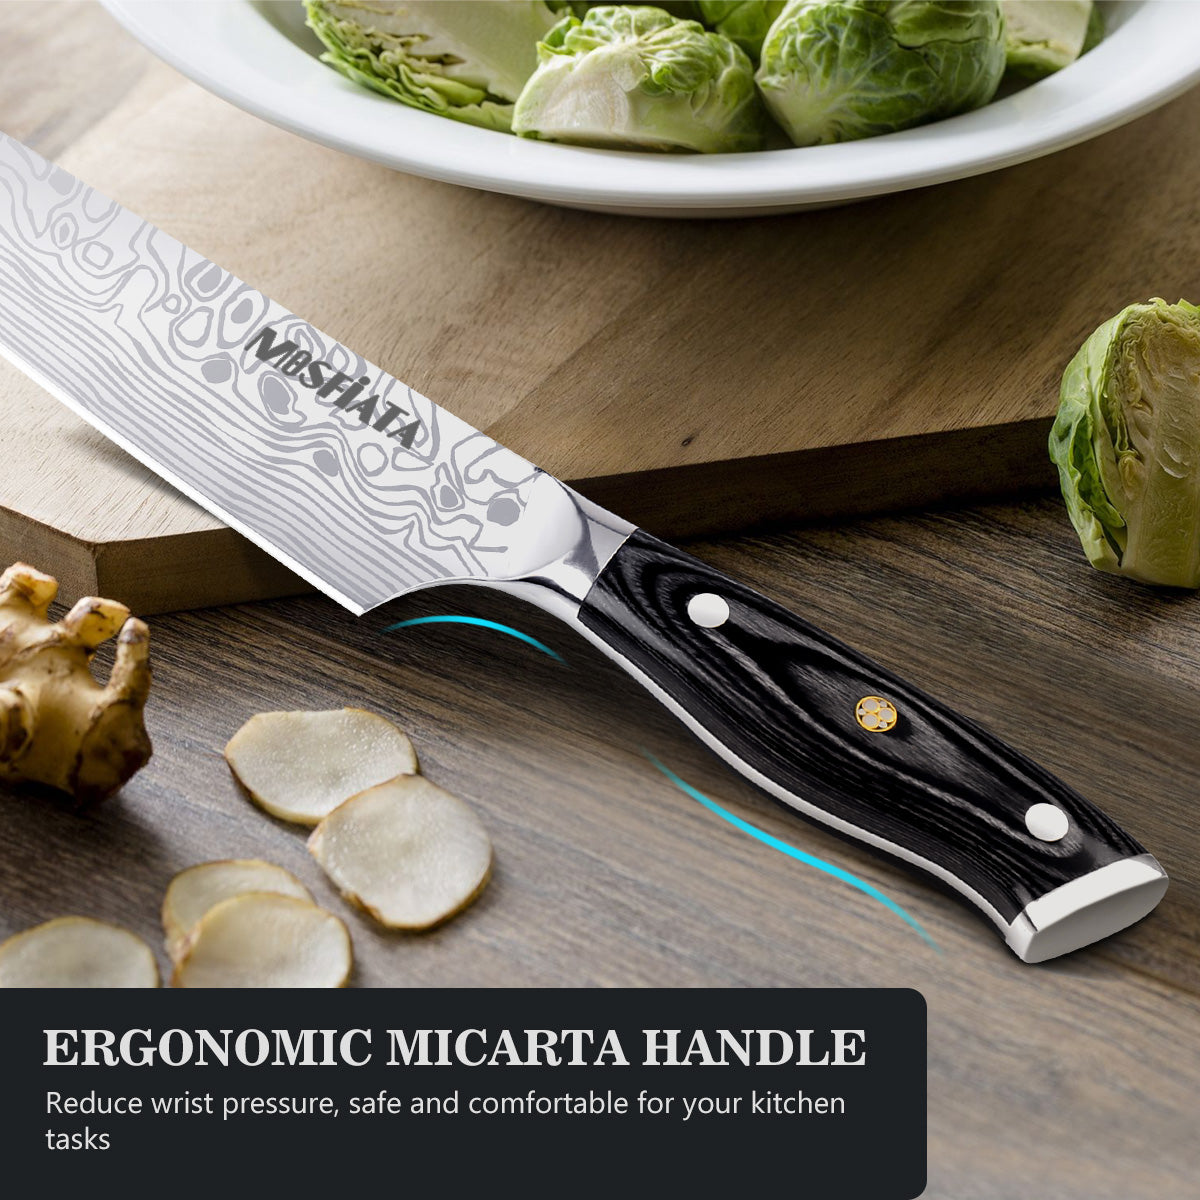 MOSFiATA 8 Chef's Knife with Finger Guard and Knife Sharpener